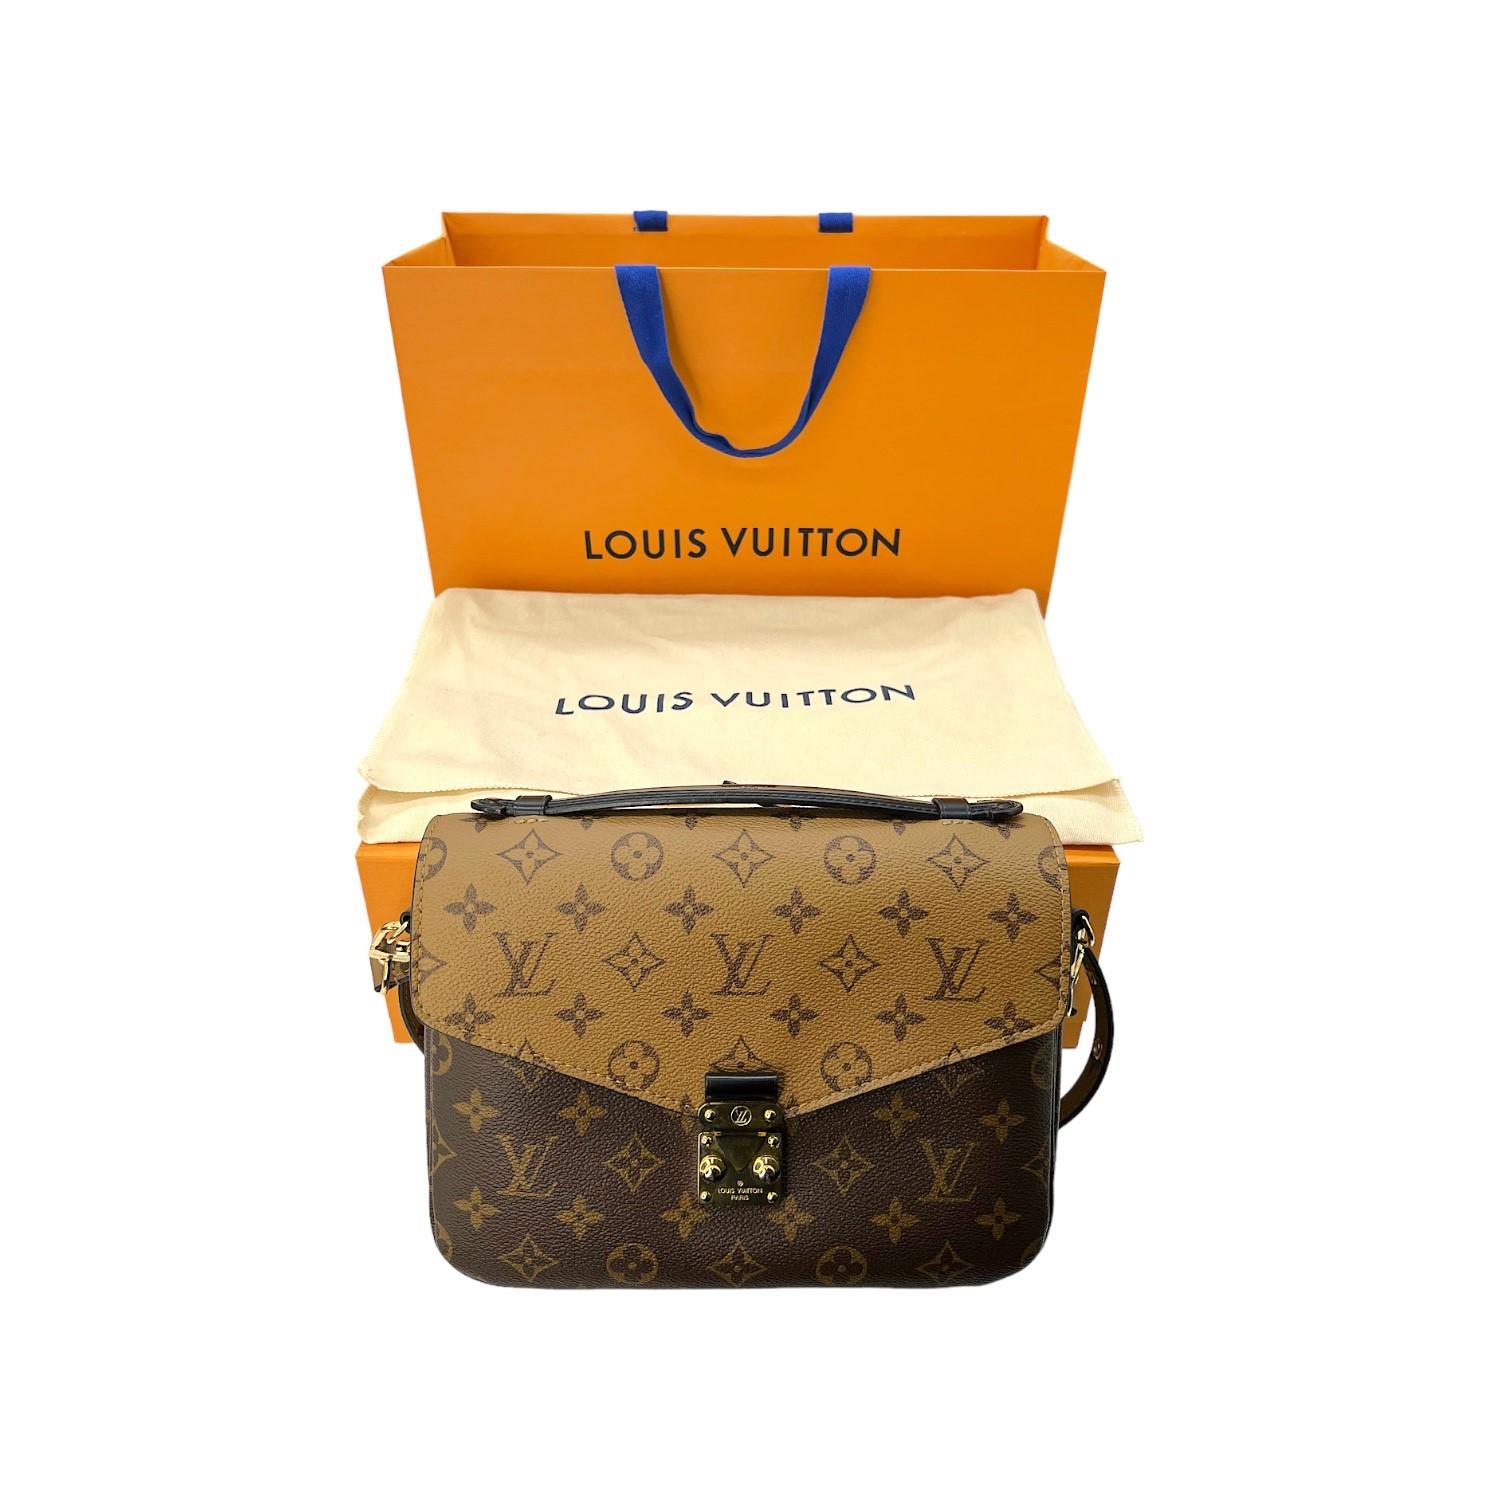 This Louis Vuitton Pochette Métis bag was made in France and it is crafted of the trendy Louis Vuitton Monogram Reverse coated canvas exterior with leather trimming and gold-tone hardware features. It has a zipper pocket on the backside and it also